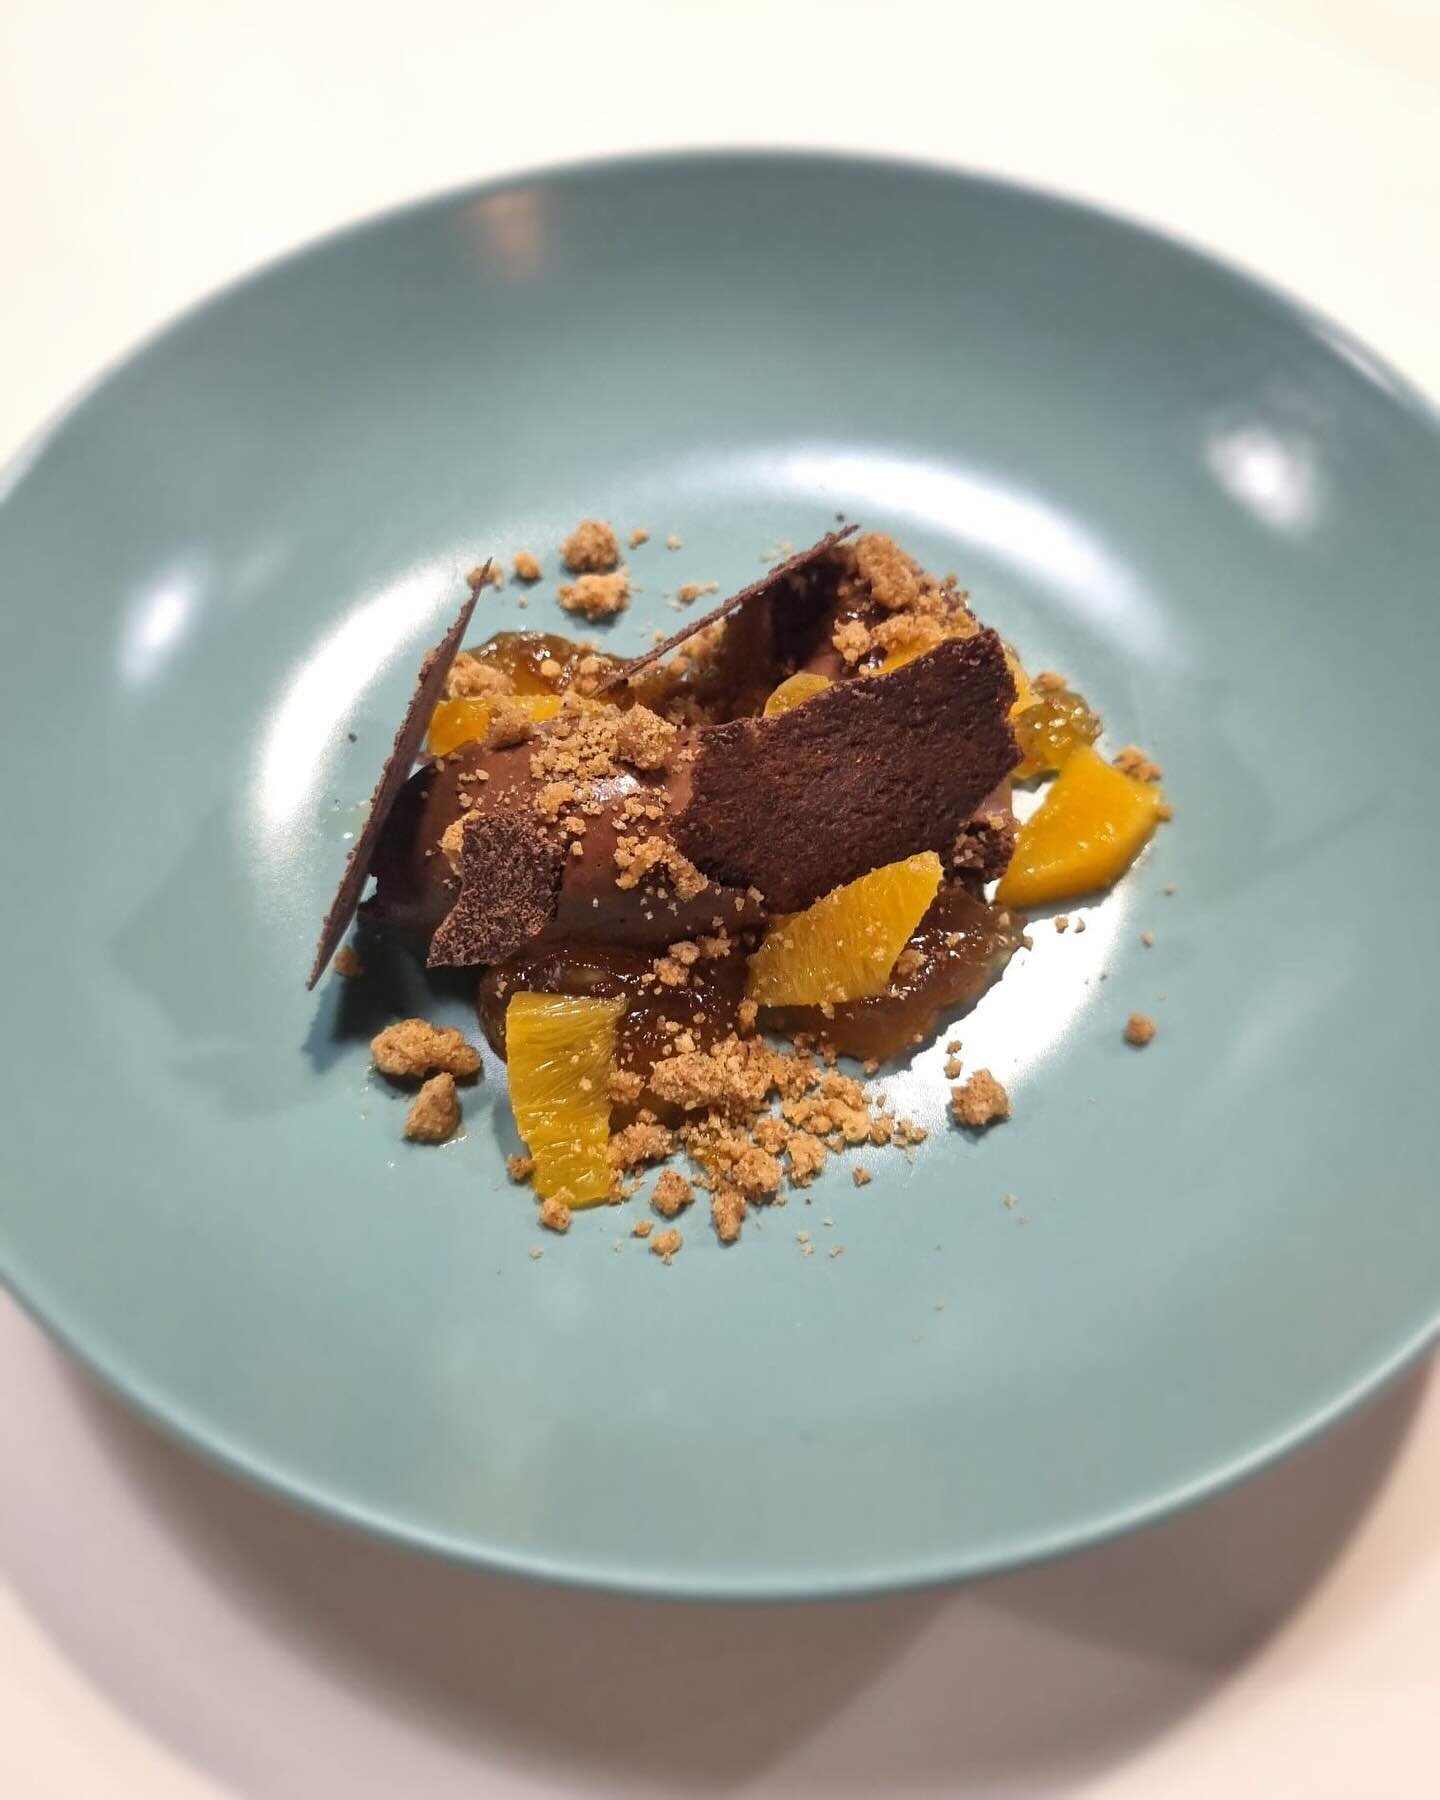 Chocolate orange 🍊 

Chocolate cr&eacute;meux, orange marmalade, chocolate tuile and crumble. 

Book for dinner this week and give it a try.